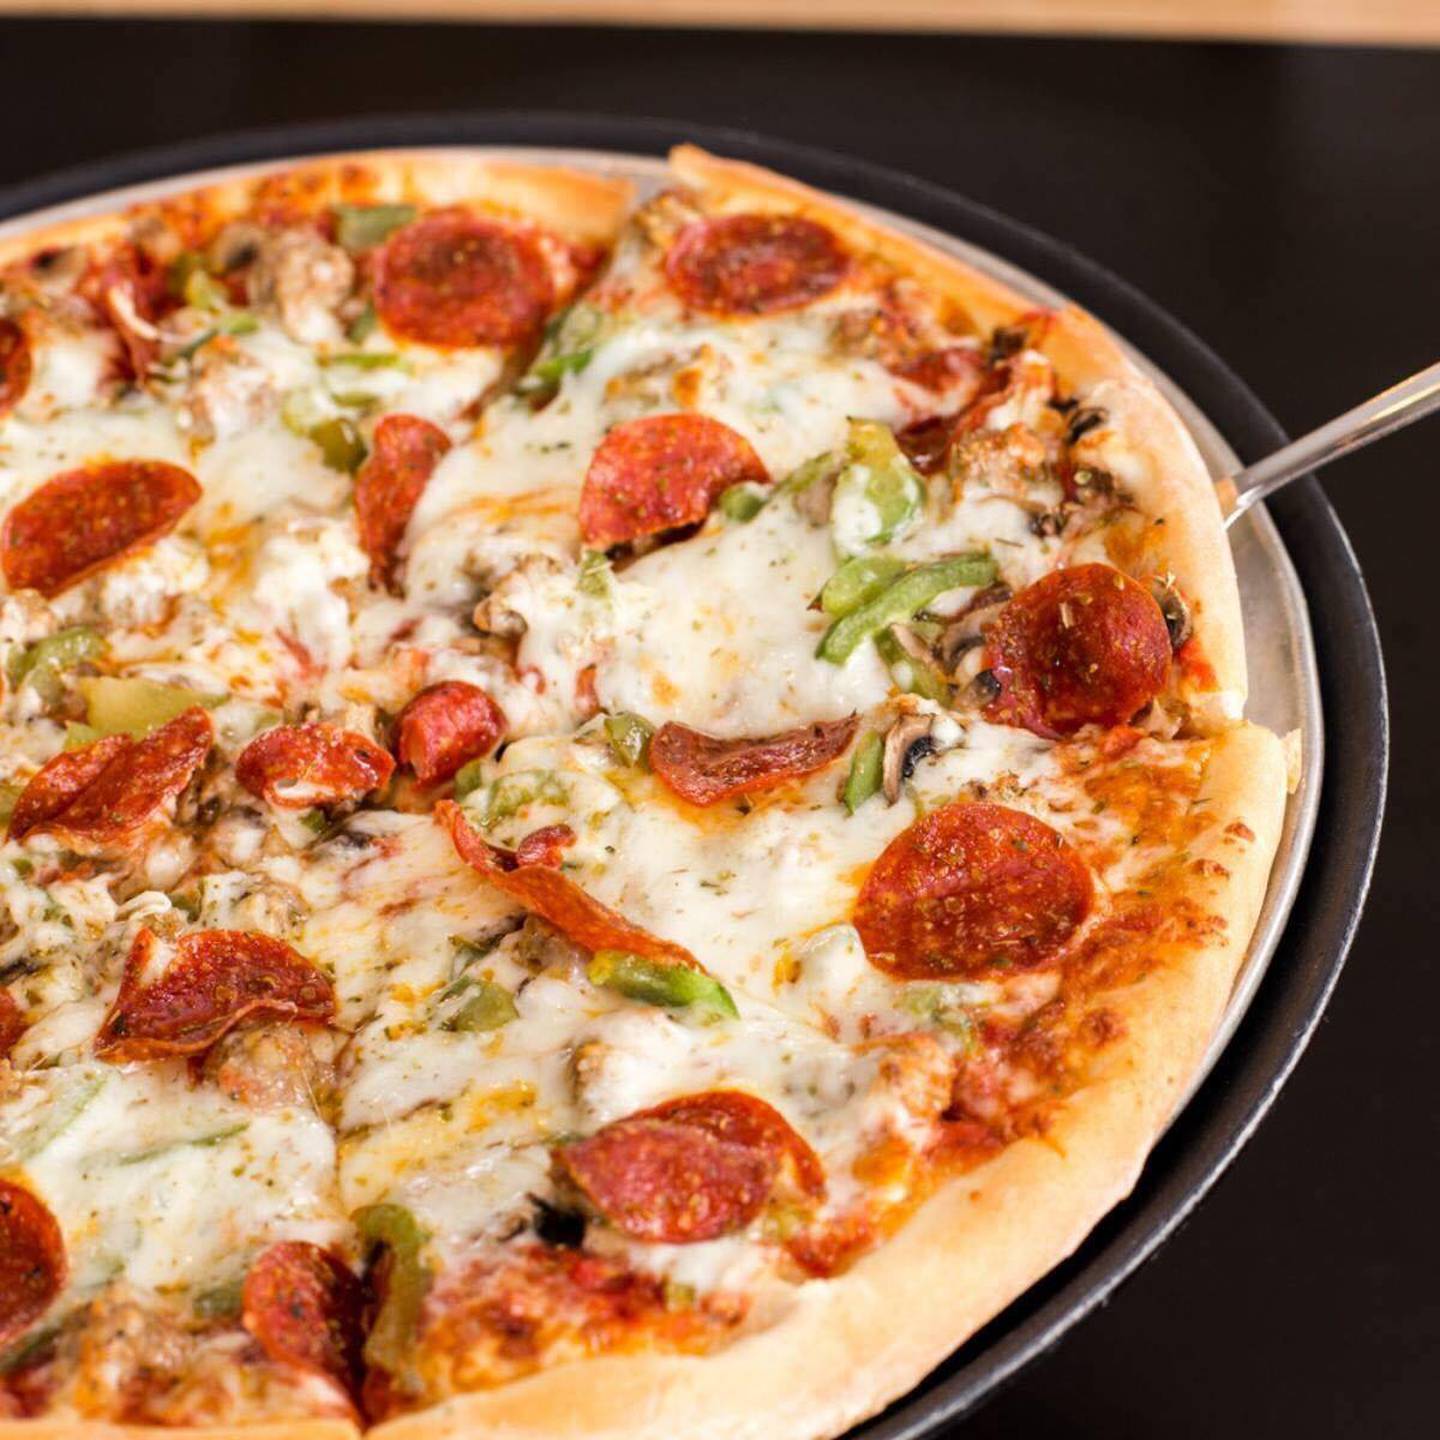 Pizza Pro's was named one of the finest pizza places in DeKalb by our readers in 2021.